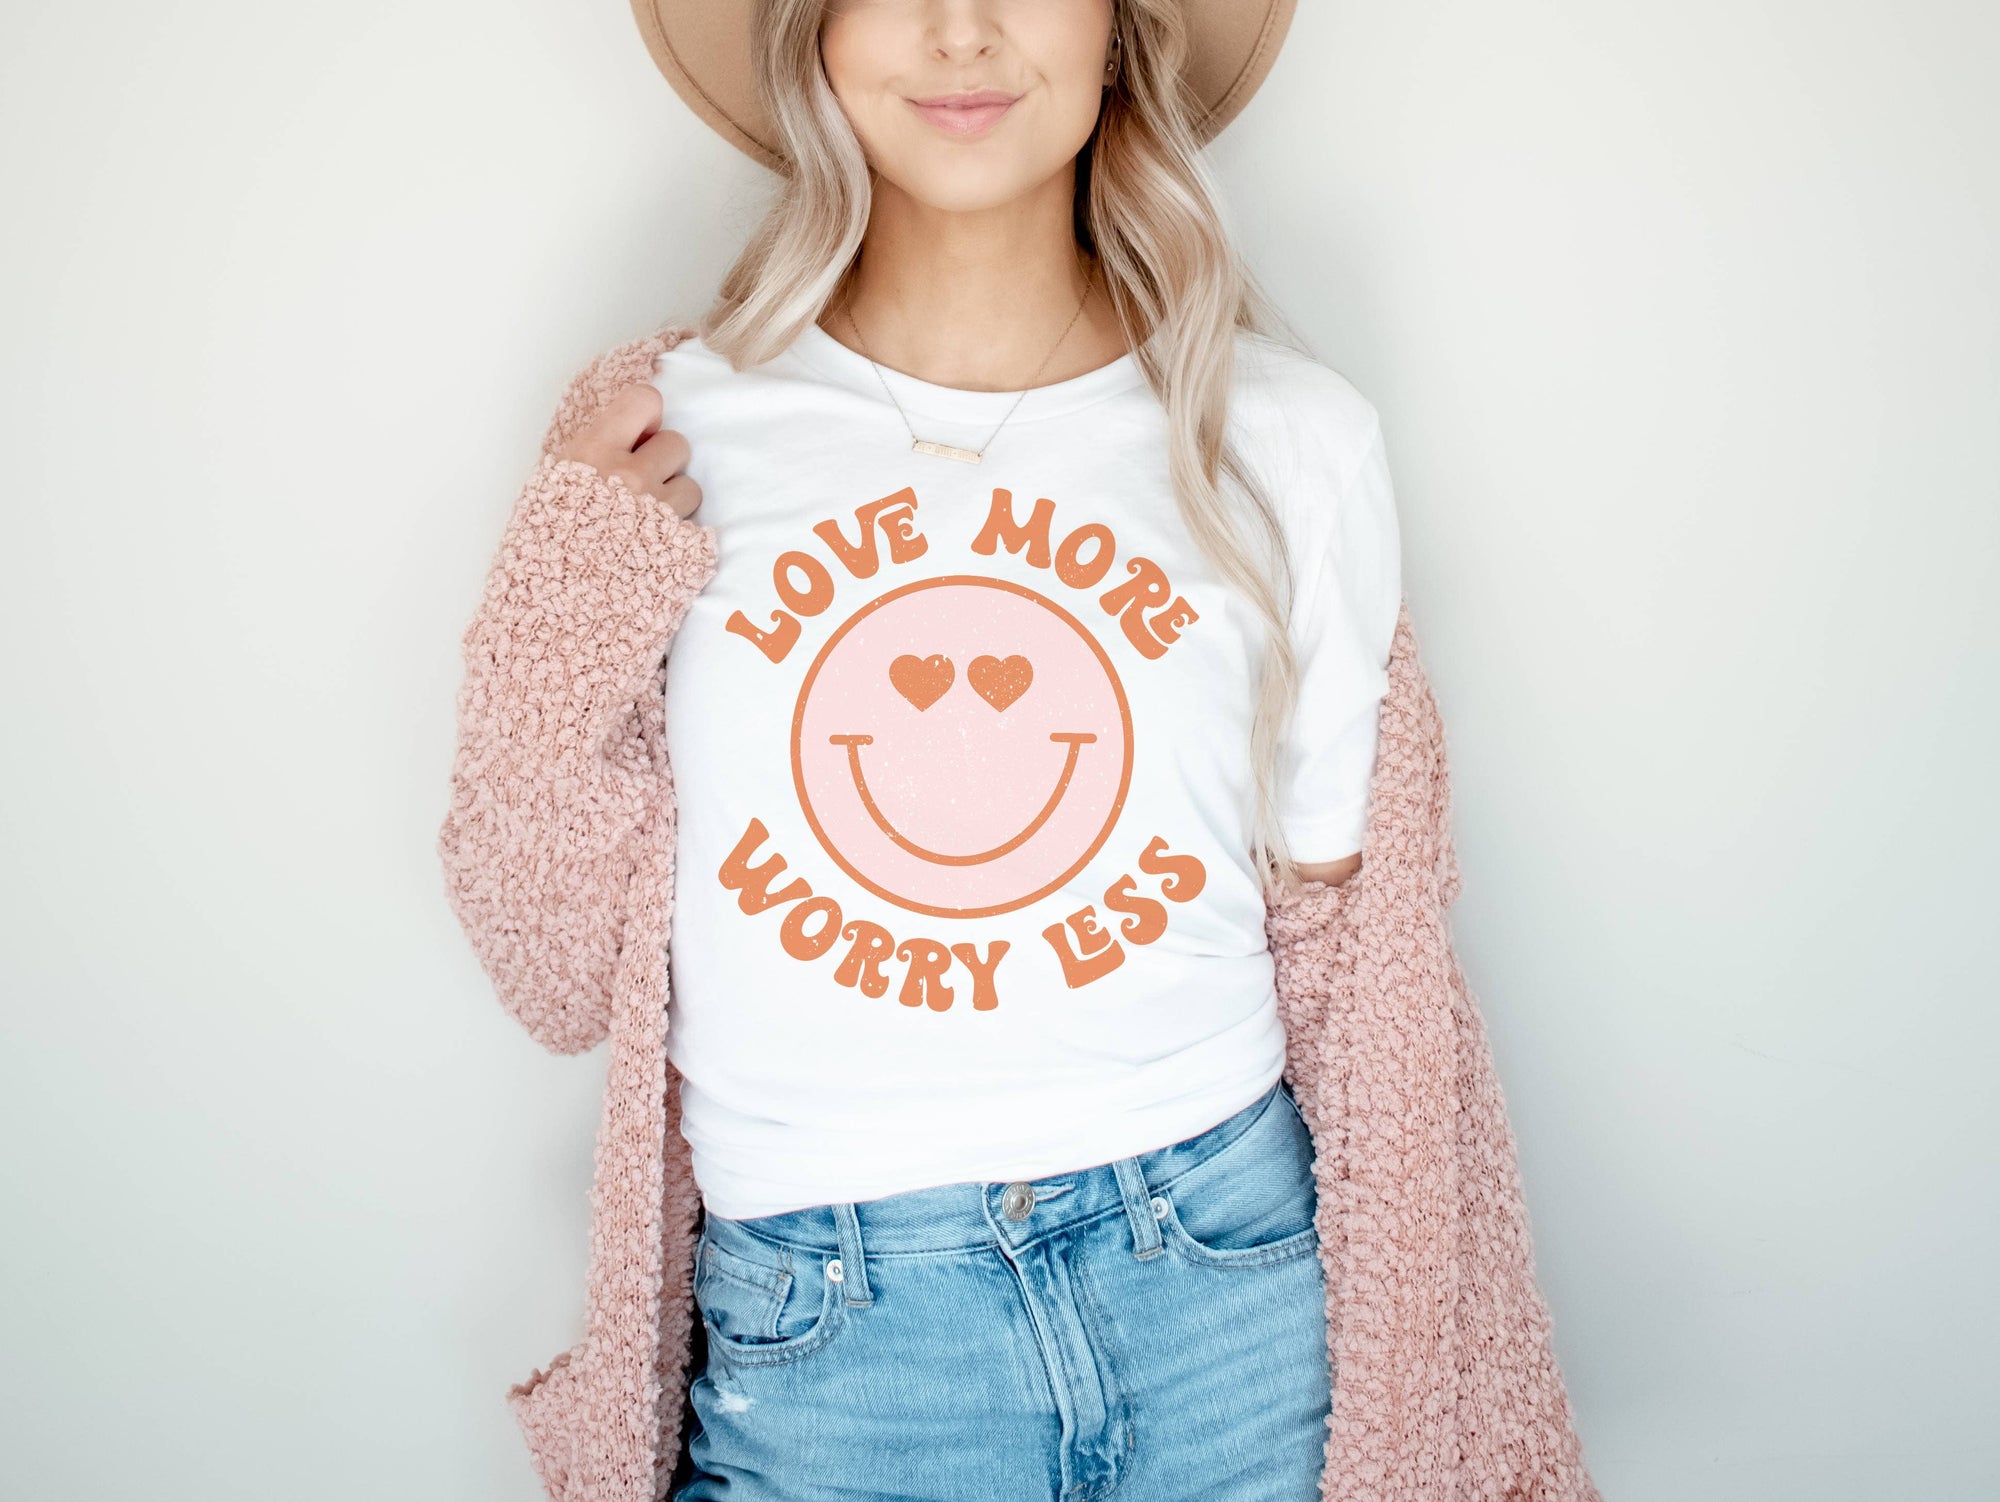 Amy Anne Apparel Inc - Smiley Love More | Valentines Day Graphic Tee